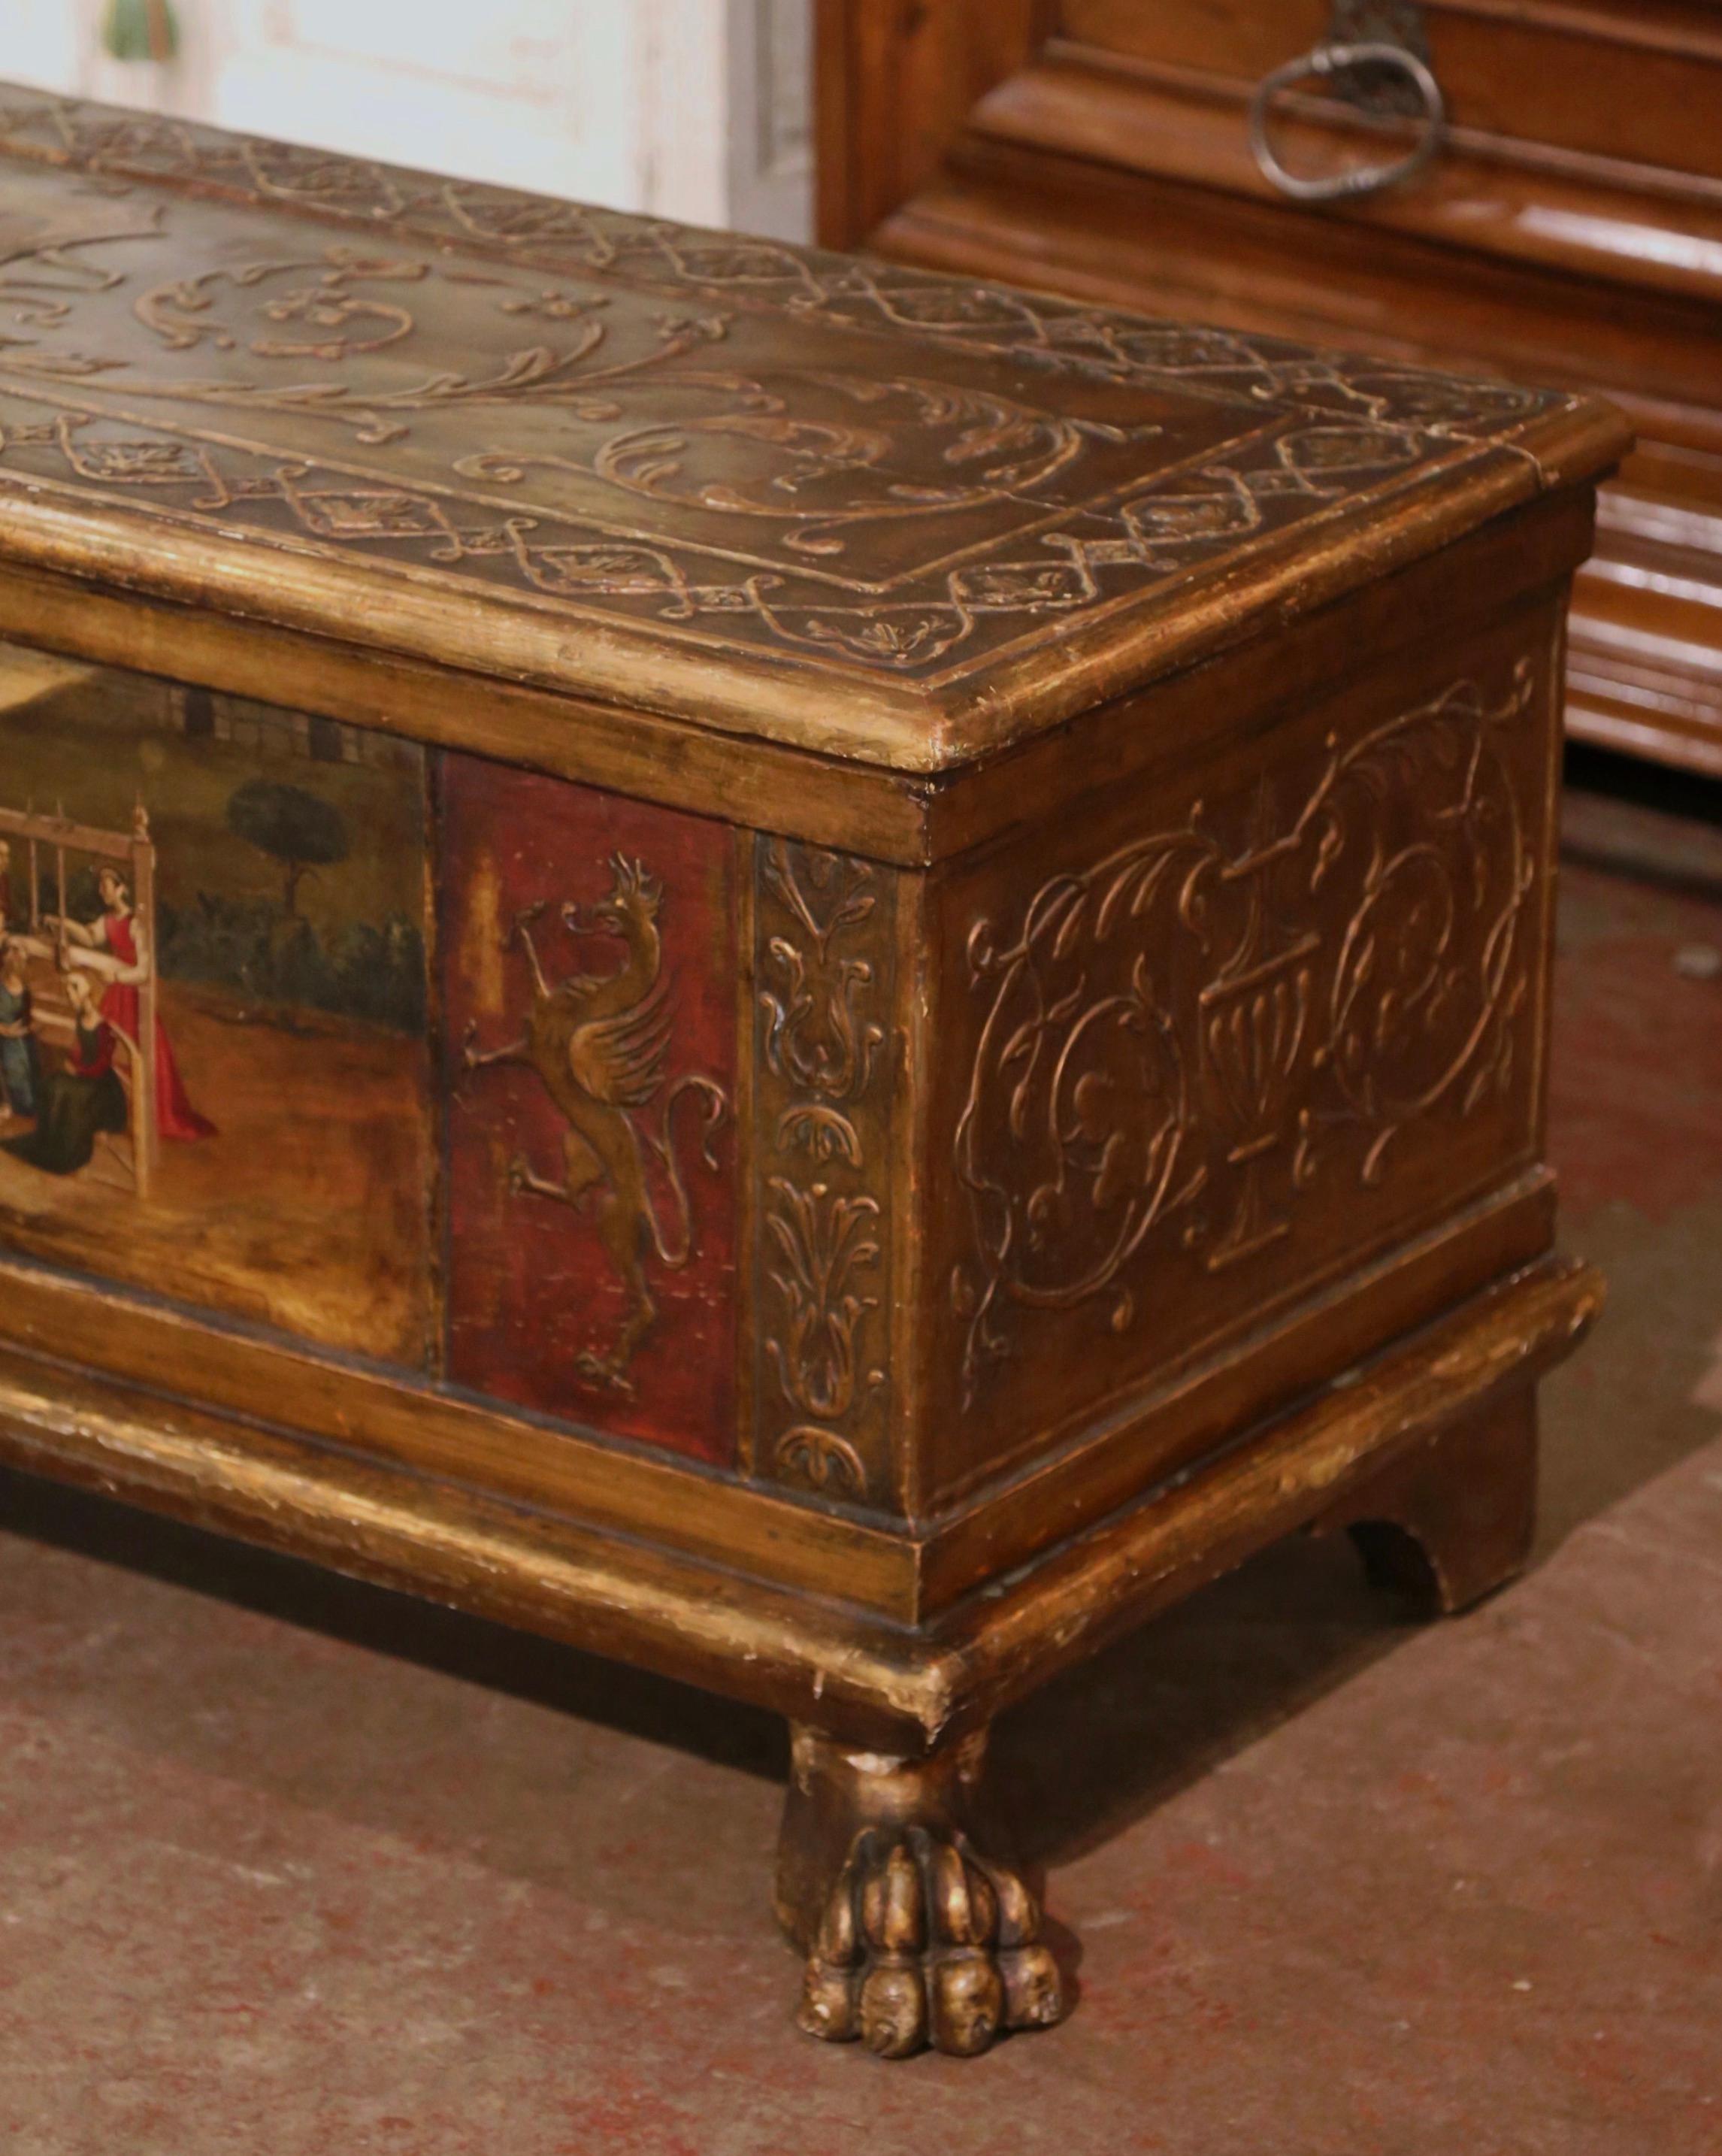 Hand-Carved Mid-18th Century Italian Carved Giltwood and Polychrome Painted Cassone Trunk For Sale